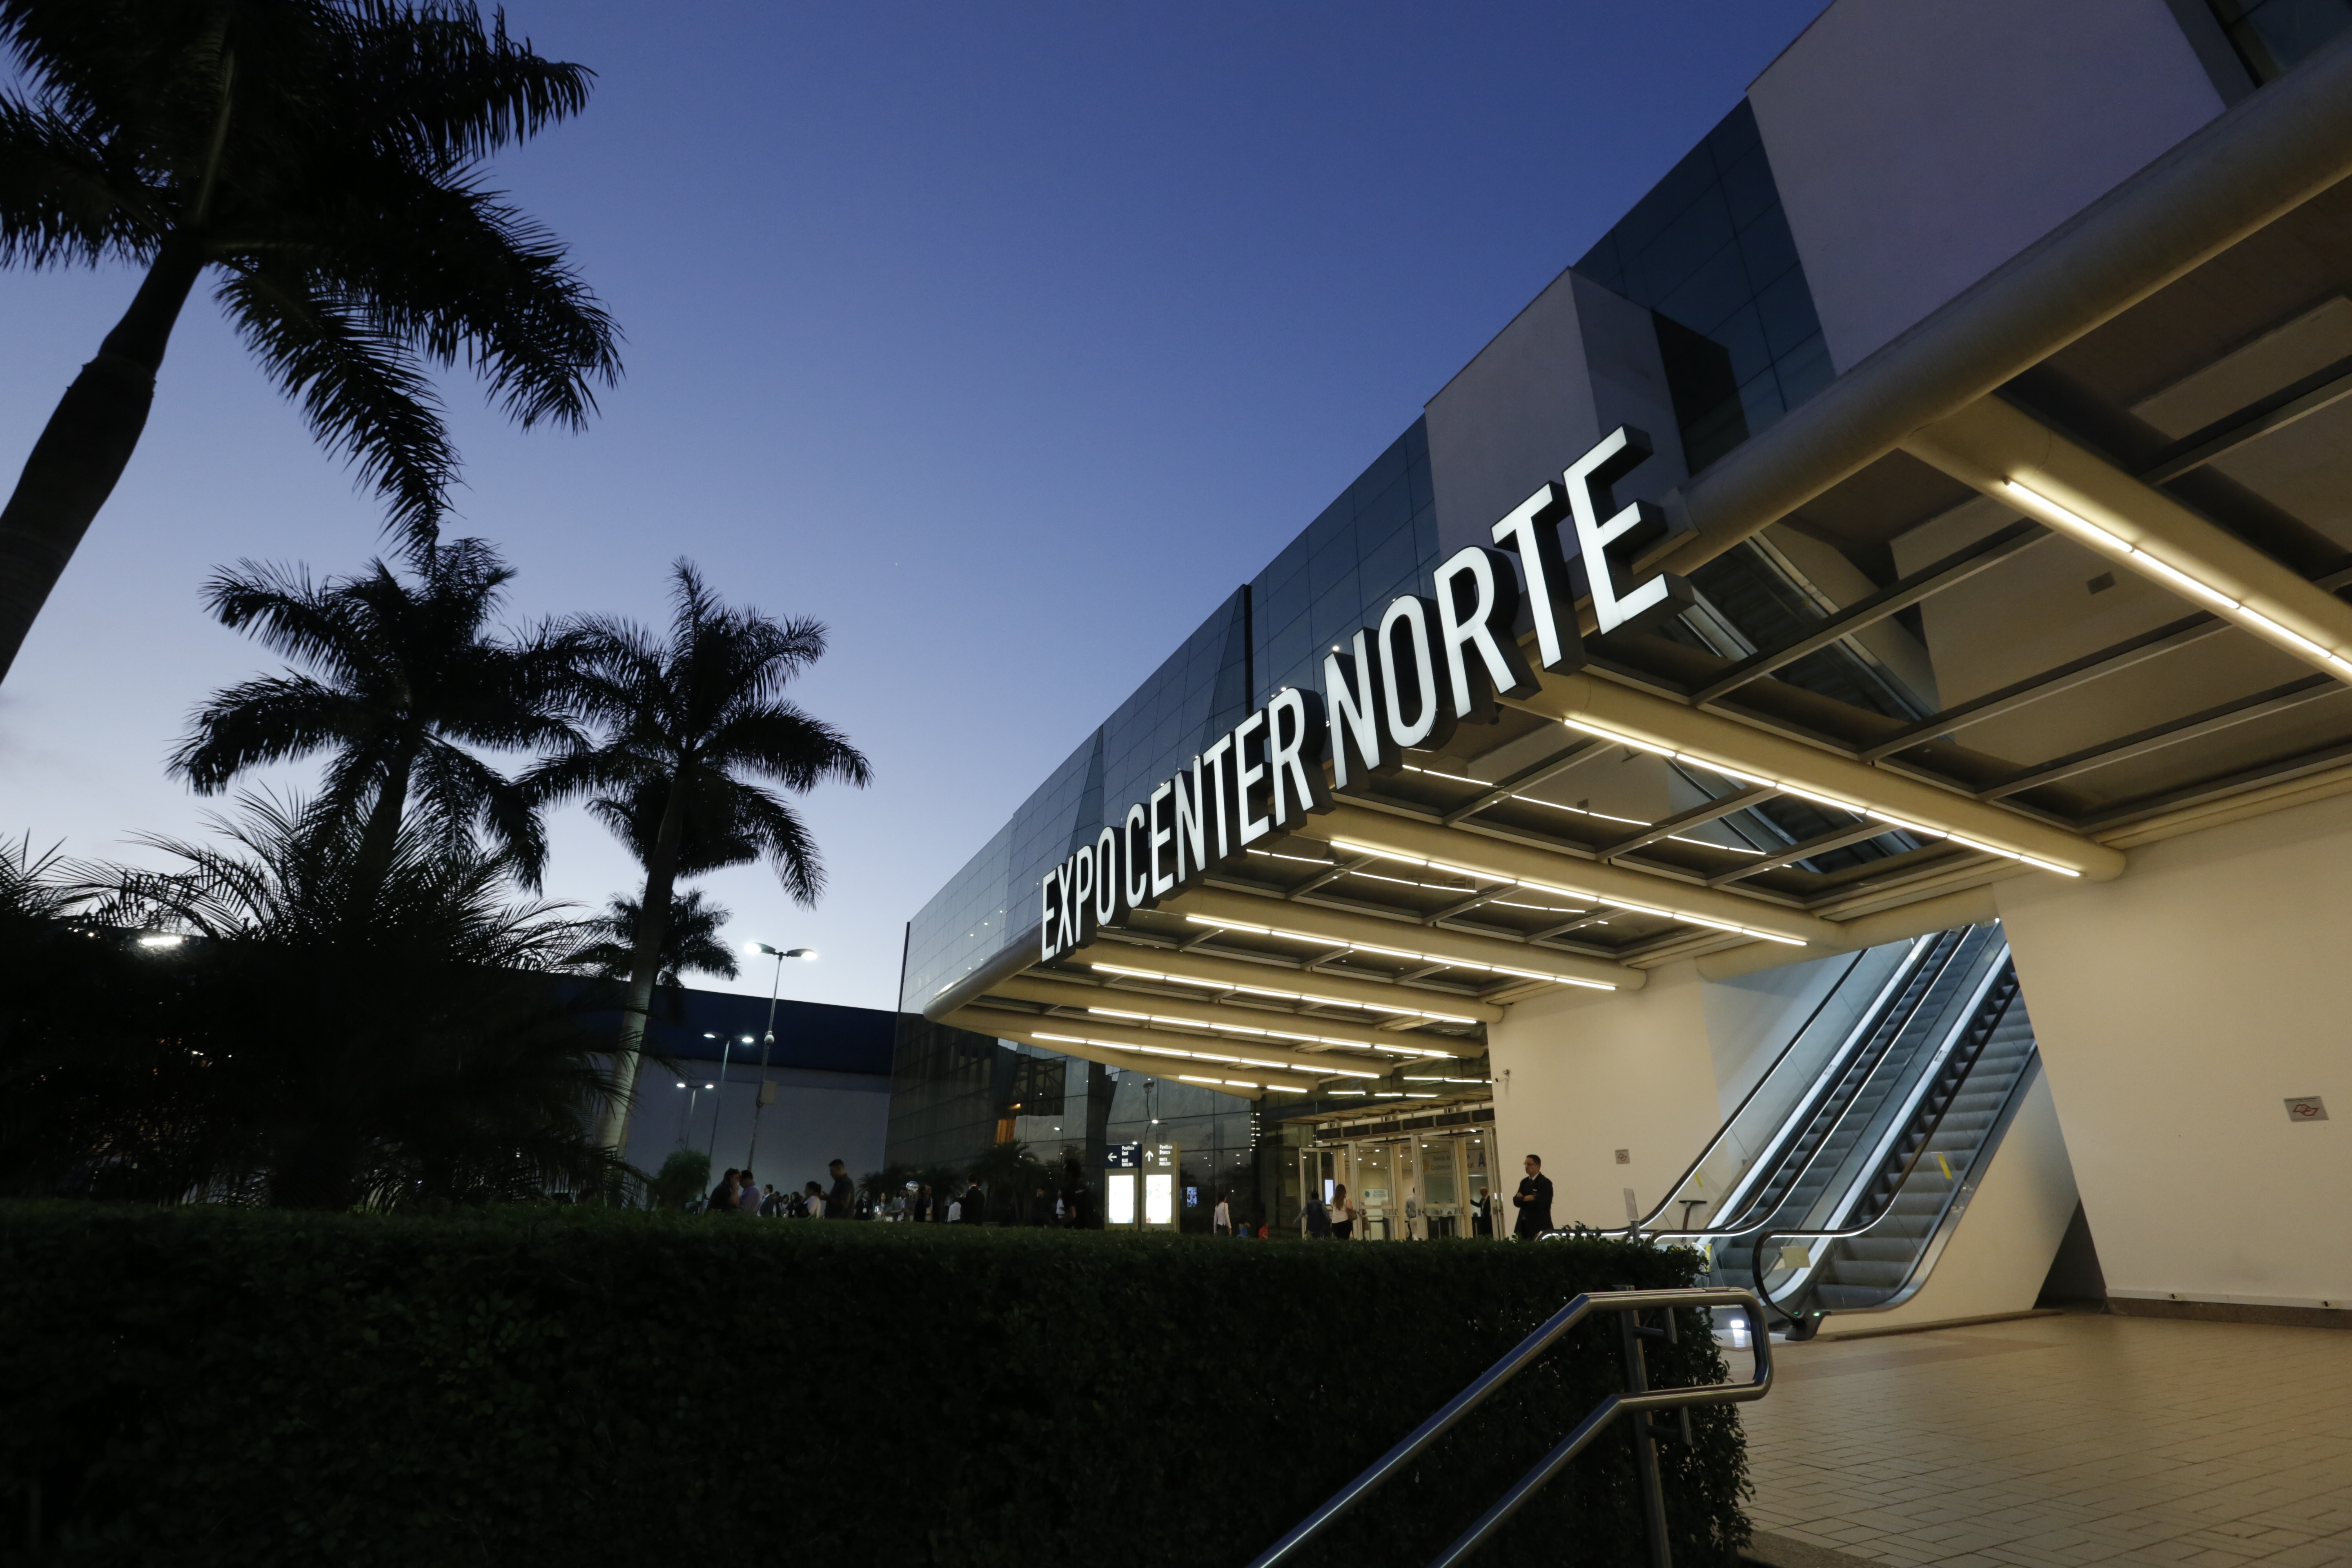 Picture of a place: Expo Center Norte